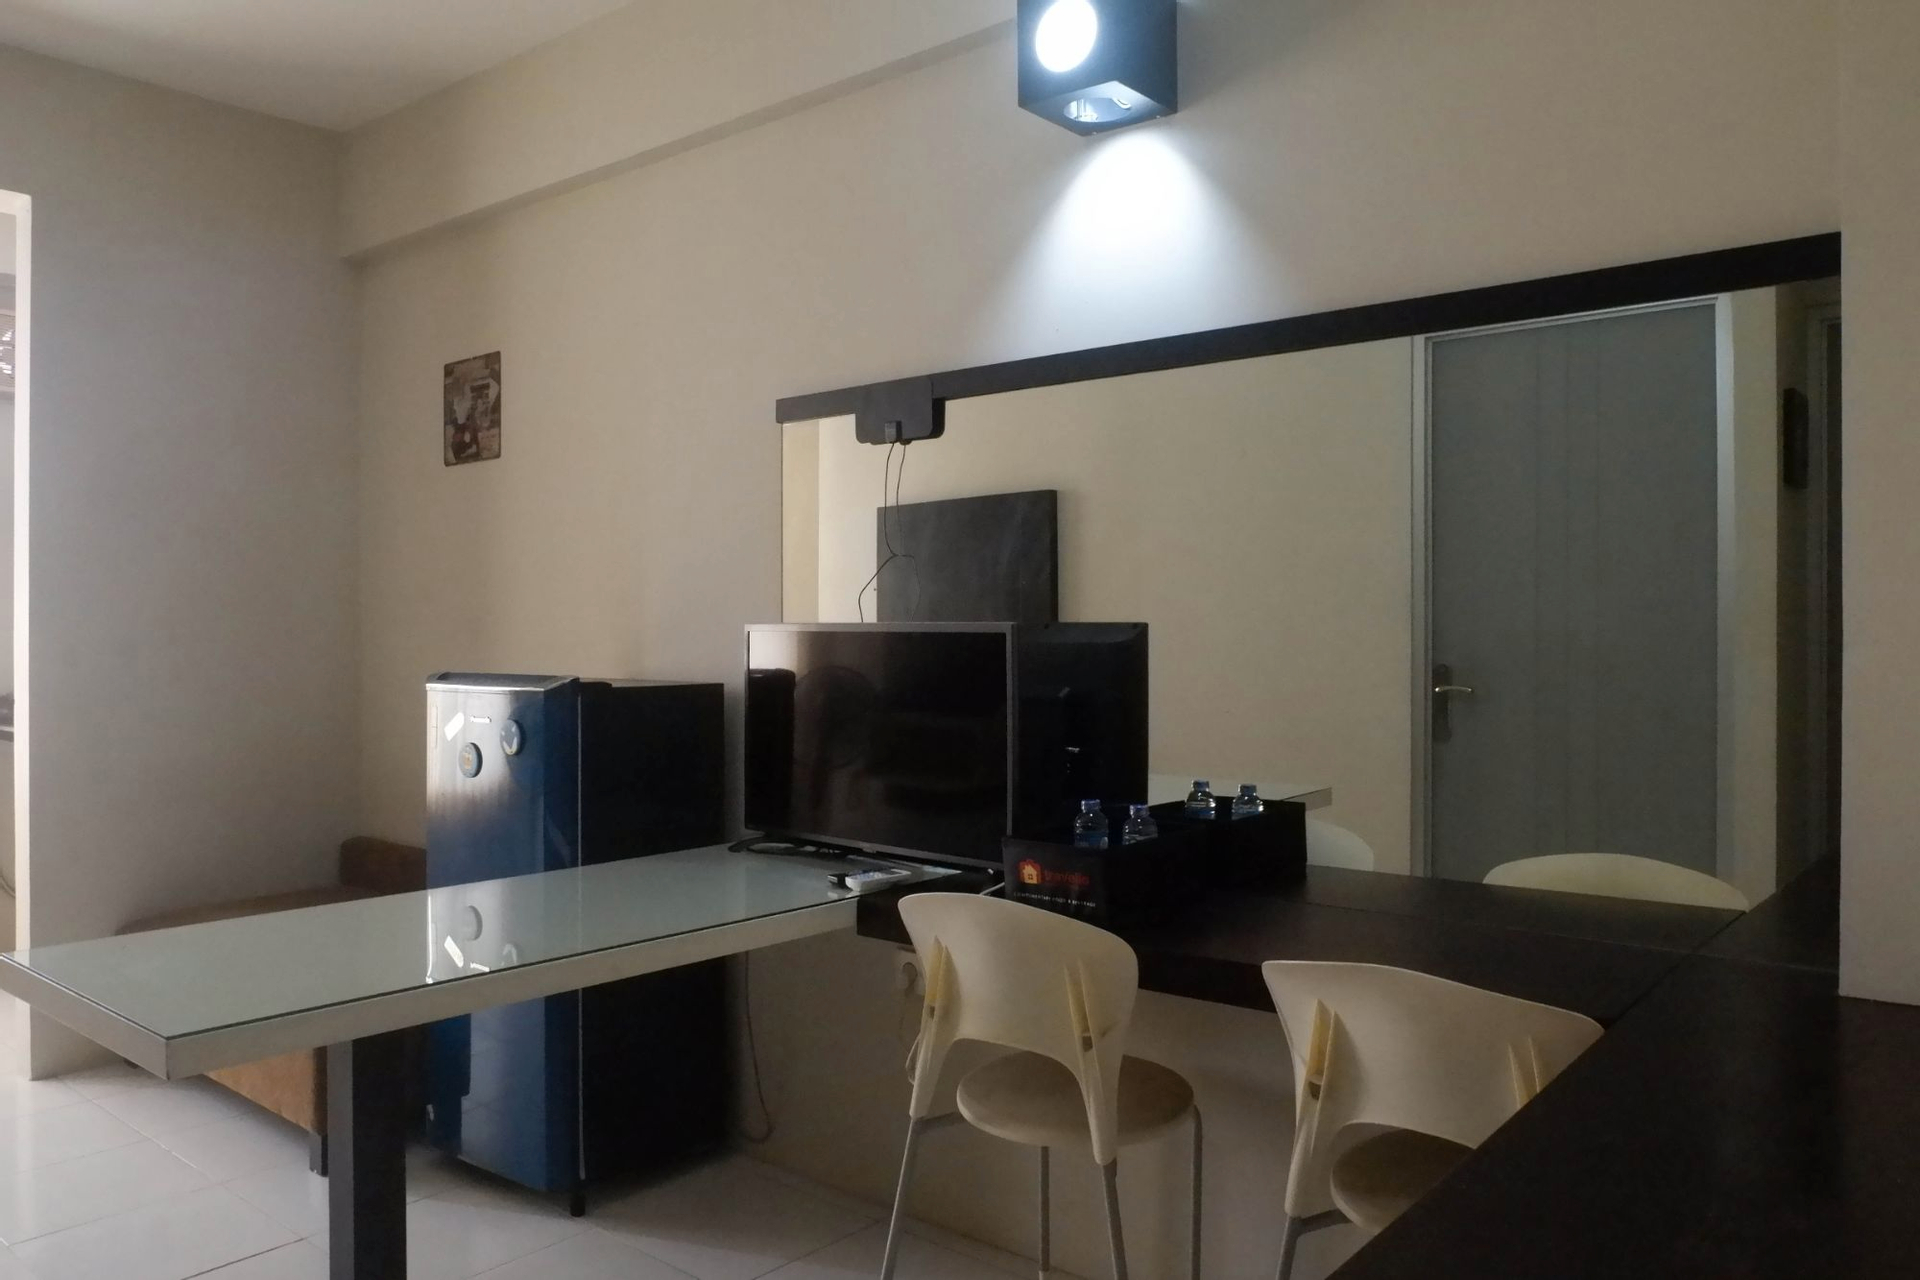 Dining Room 1, Best Deal 2BR Apartment at Dian Regency near ITS By Travelio, Surabaya